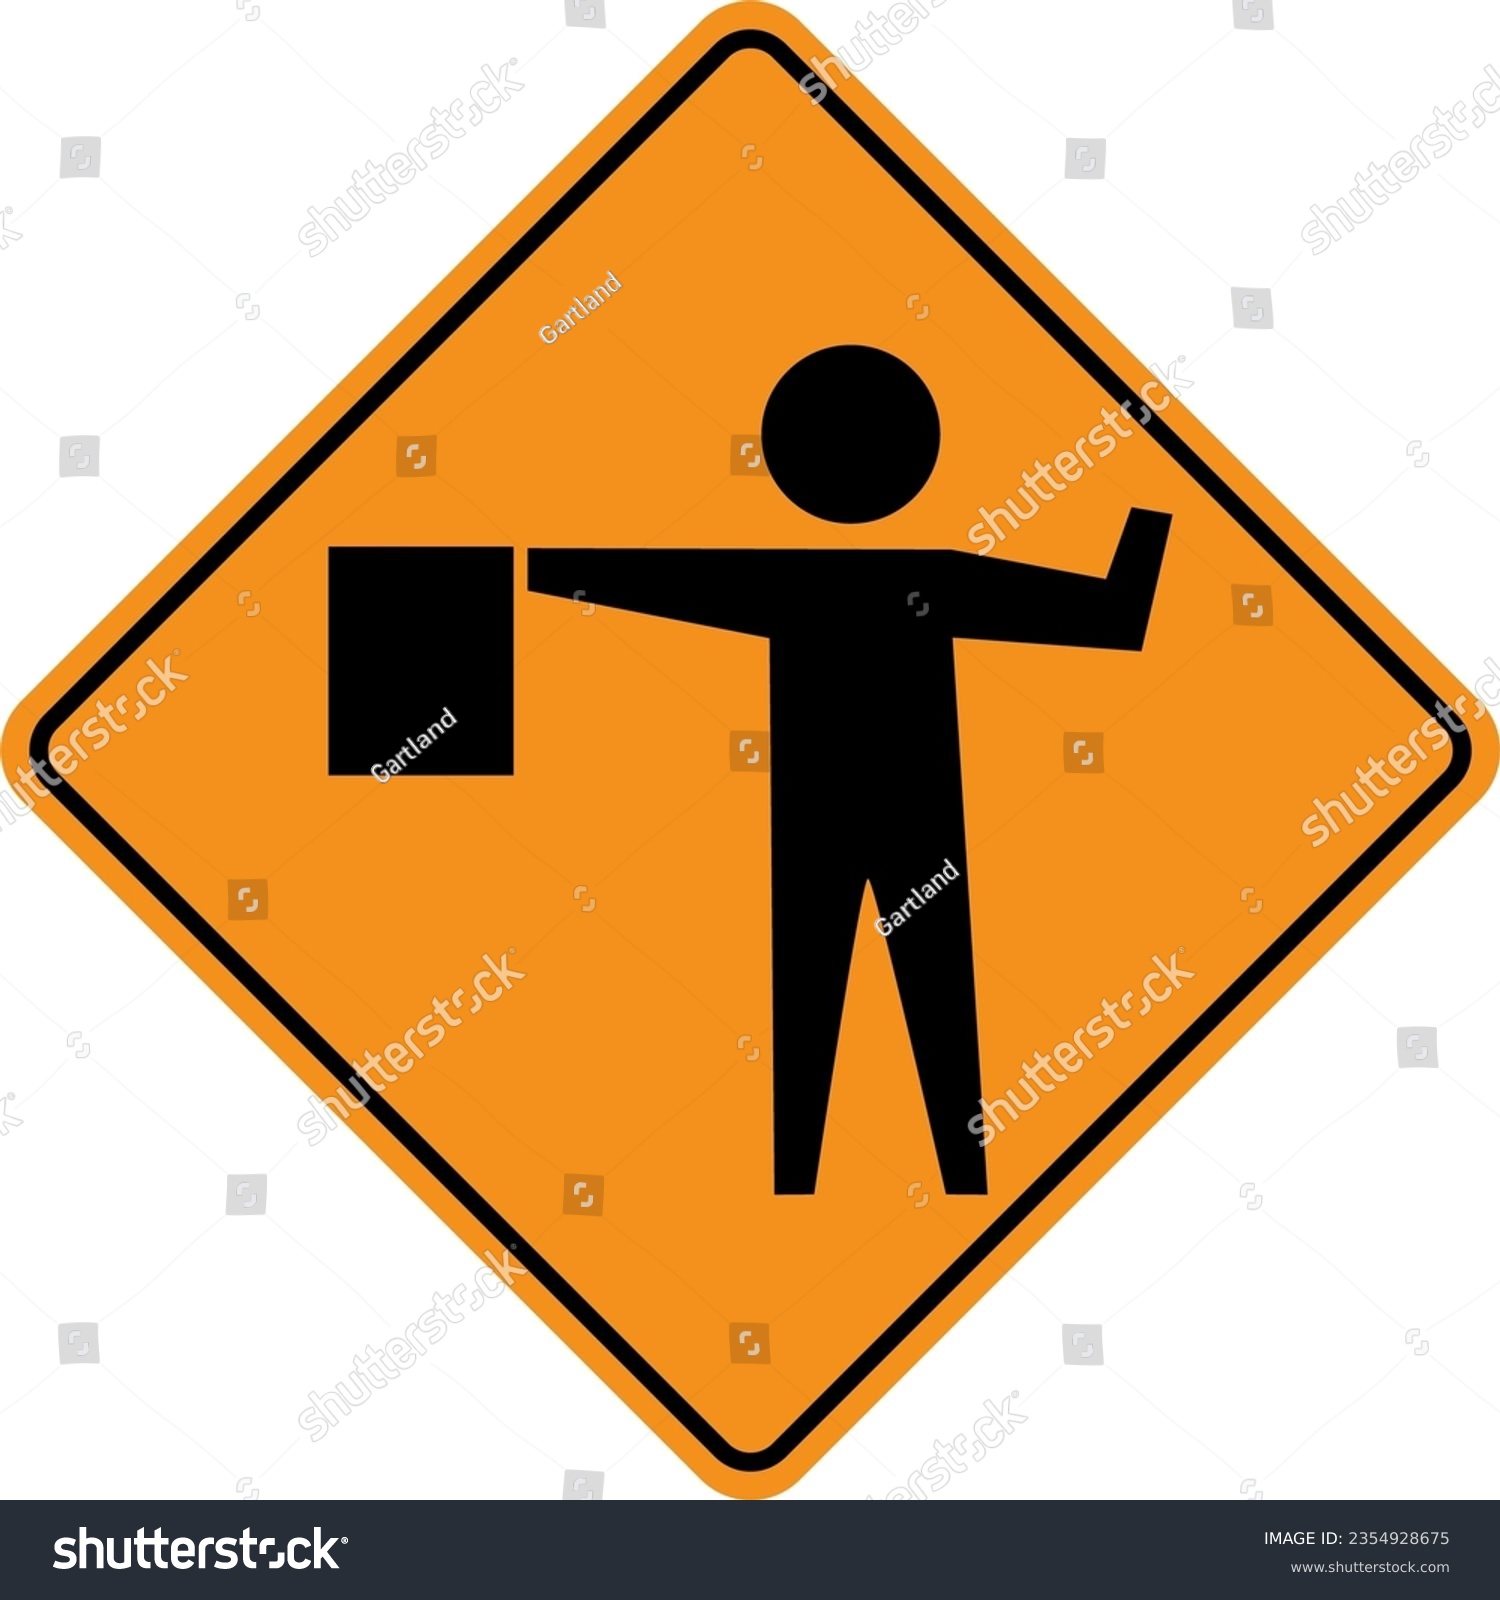 SVG of Vector graphic of a usa flagger ahead highway sign. It consists of a silhouette of a man with a flag within a black and orange square tilted to 45 degrees svg